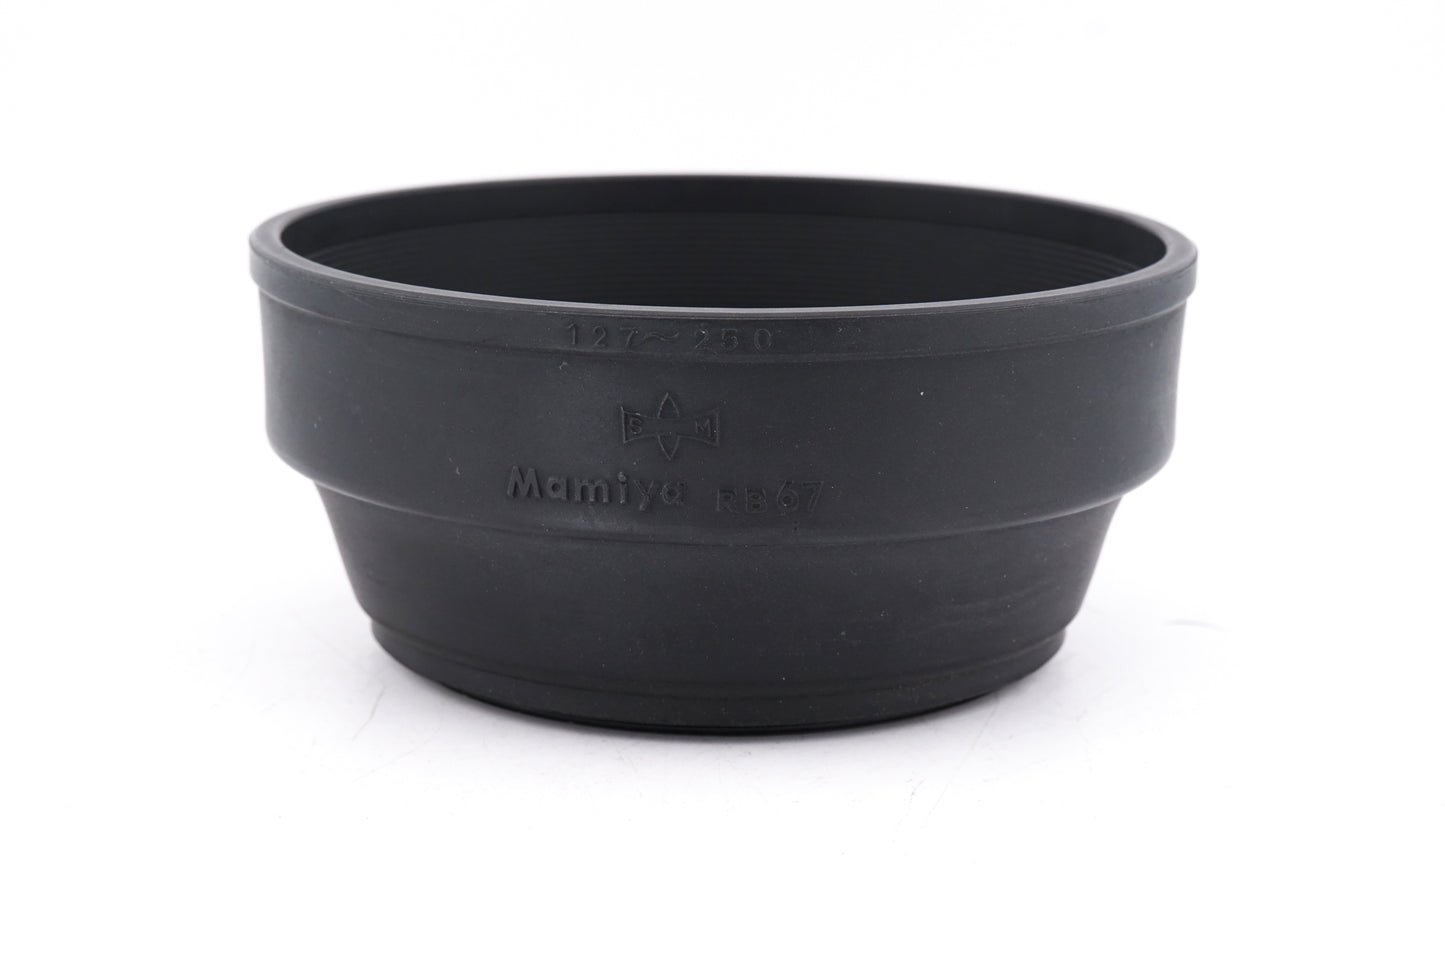 Mamiya Rubber Lens Hood For 127-250mm (RZ67/RB67) - Accessory